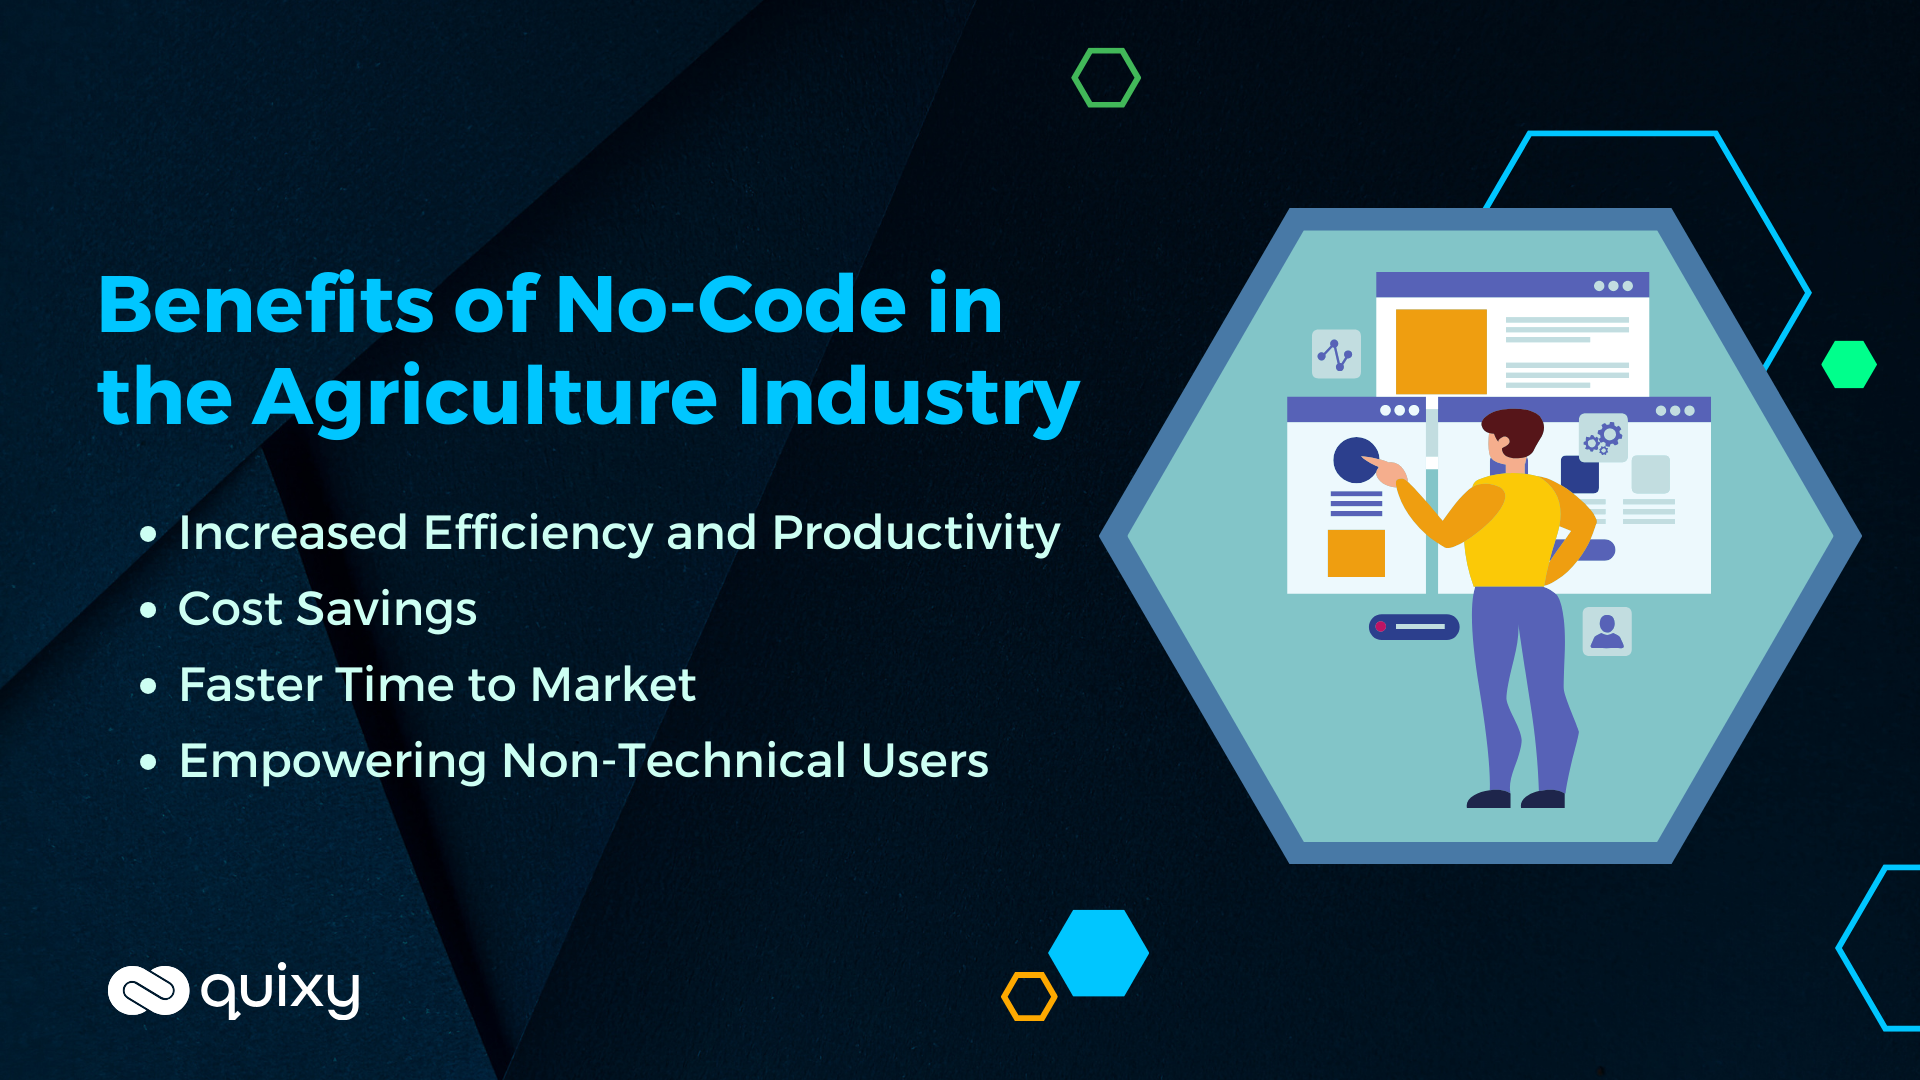 Benefits of No-Code in the Agriculture Industry